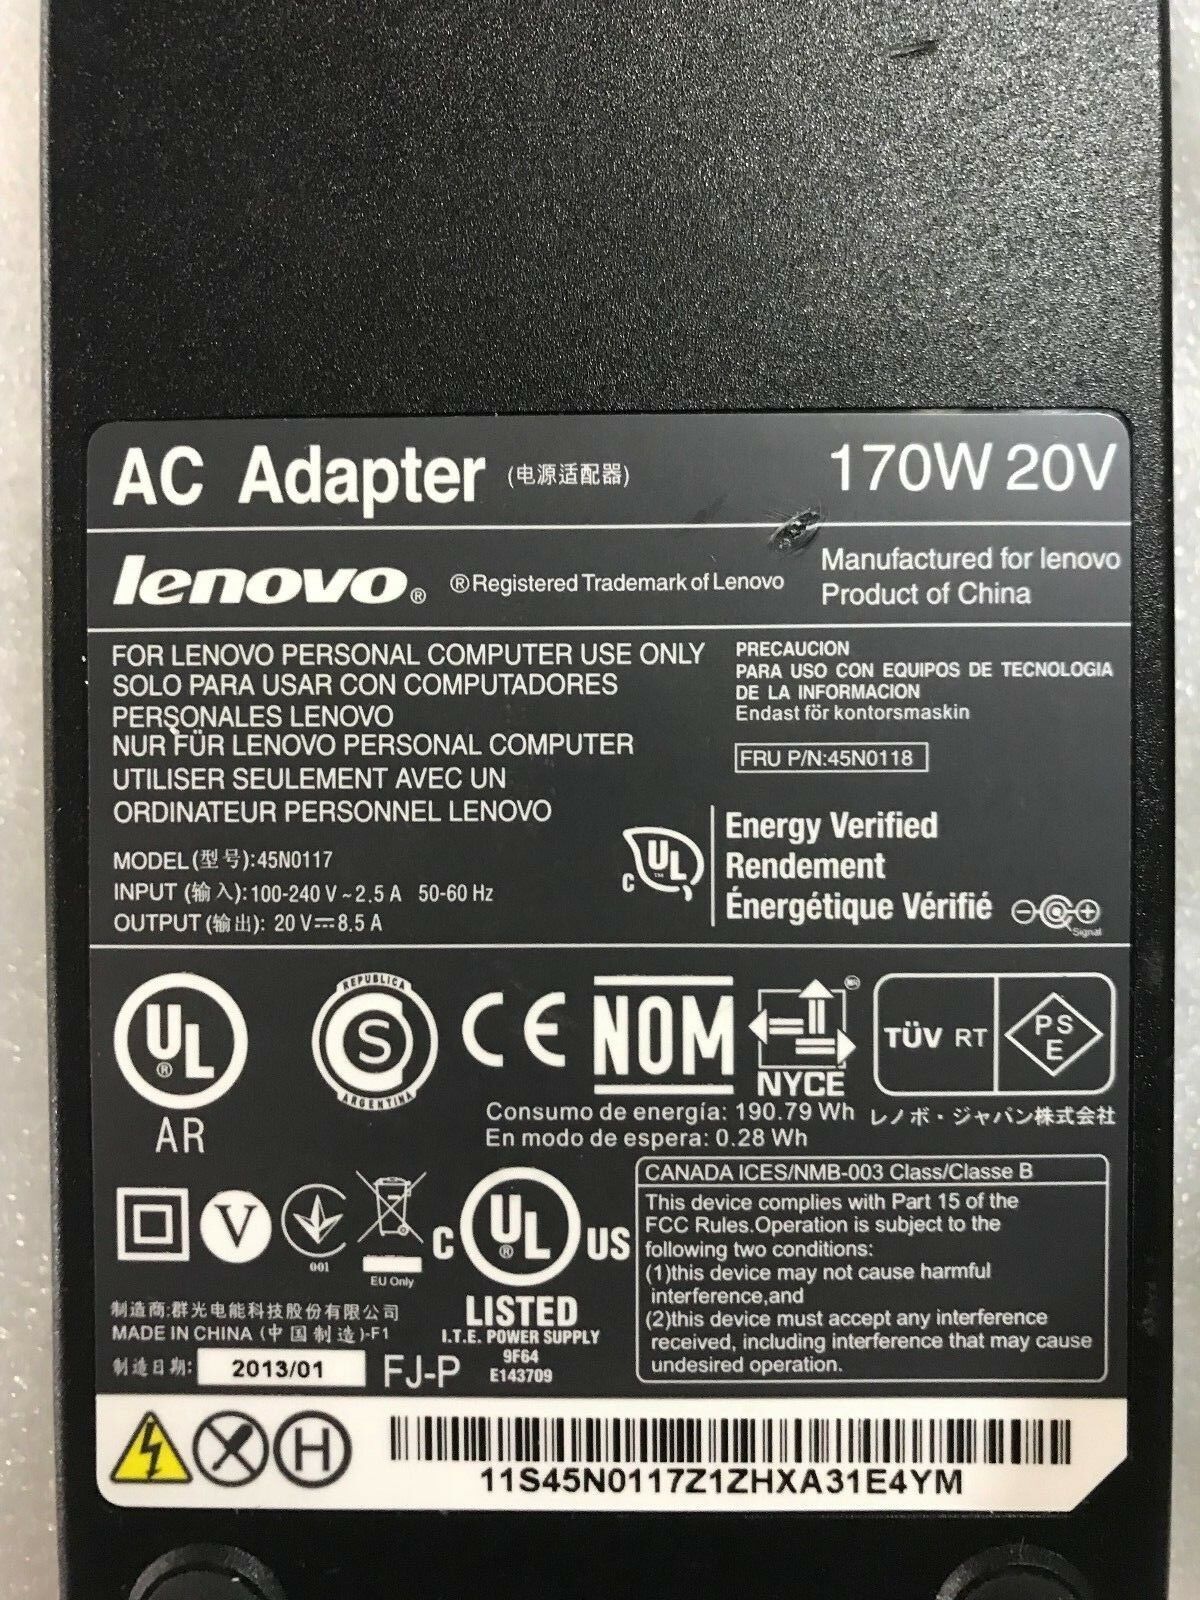 Genuine Lenovo 170W 20V 8.5A AC Adapter for W520 W530 Compatible Brand: For